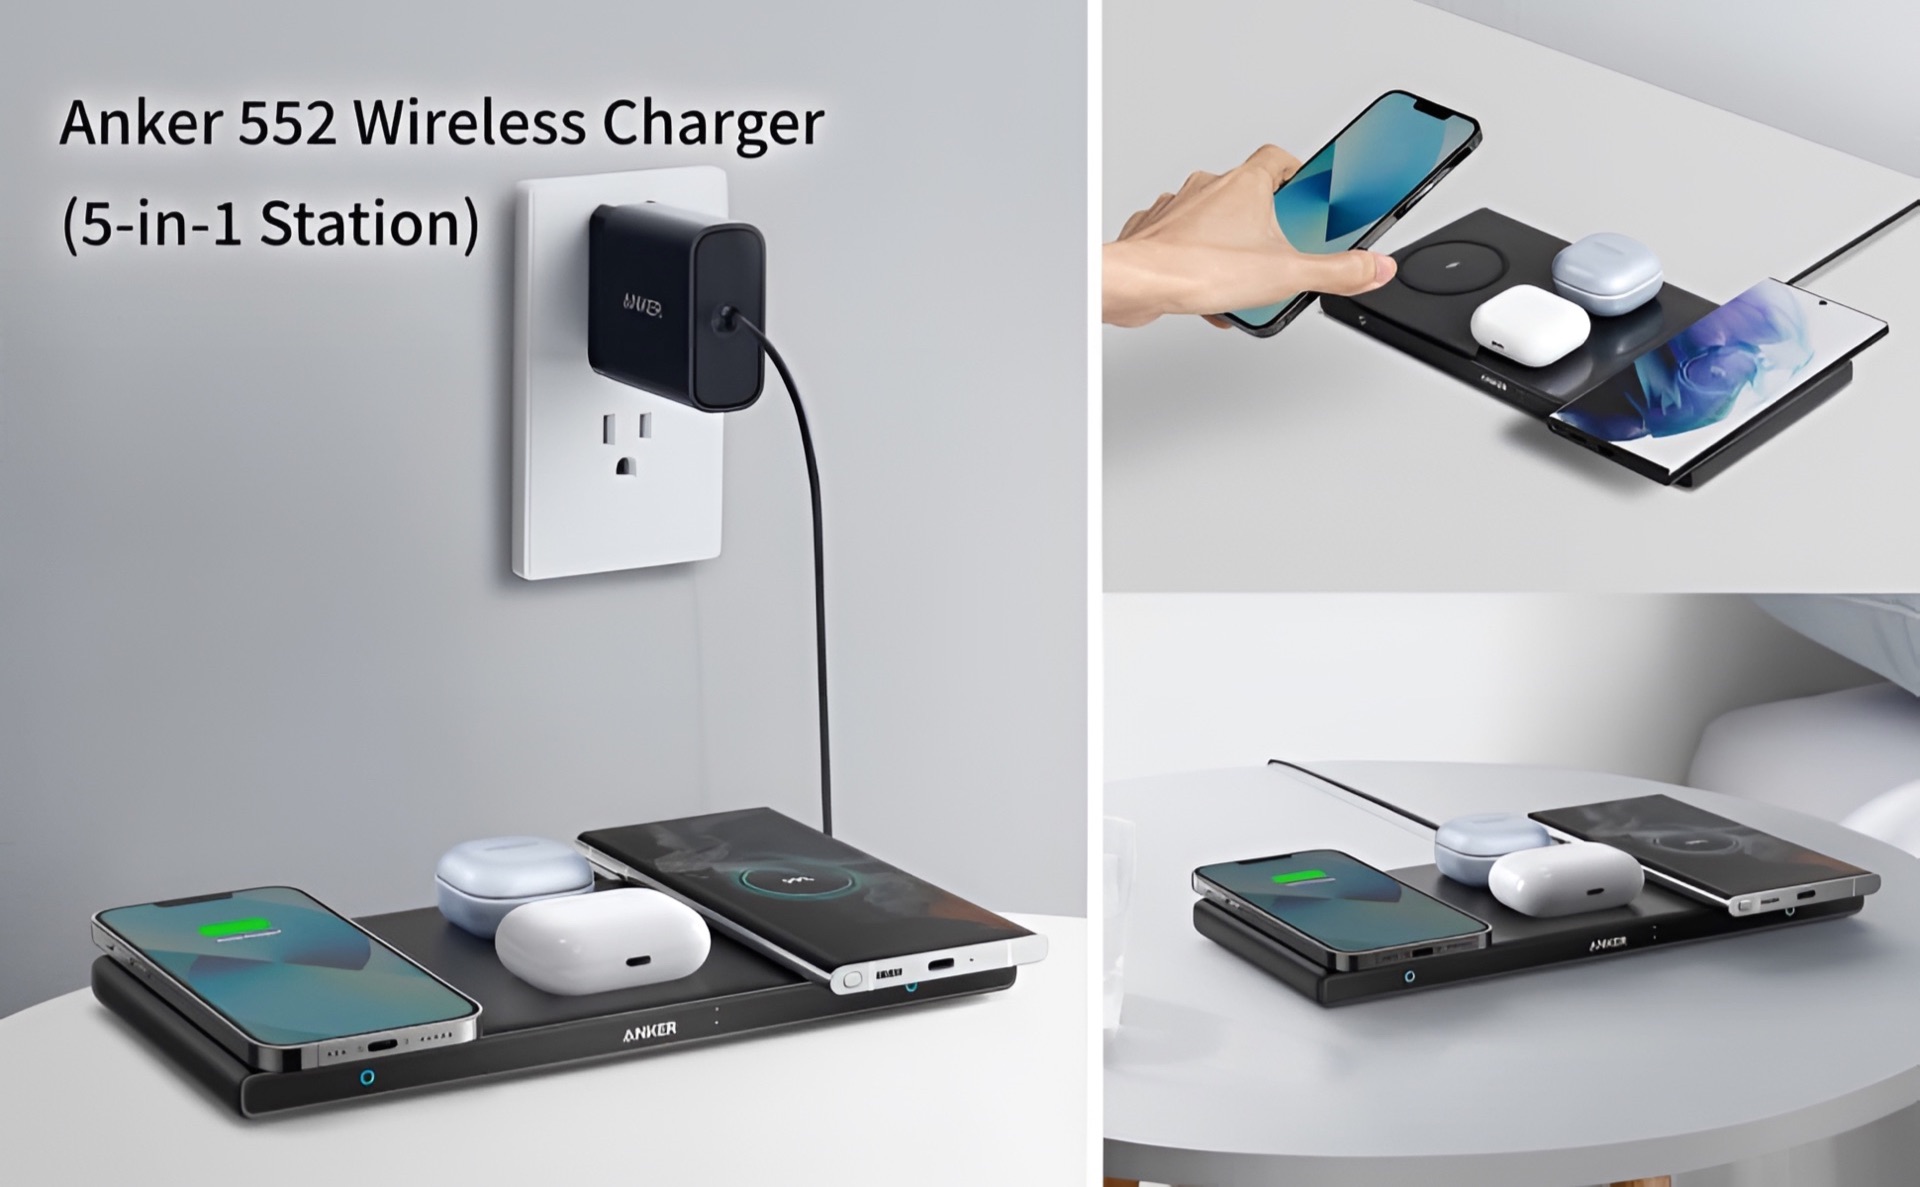 Anker 552 Wireless Charger 5-in-1 Station